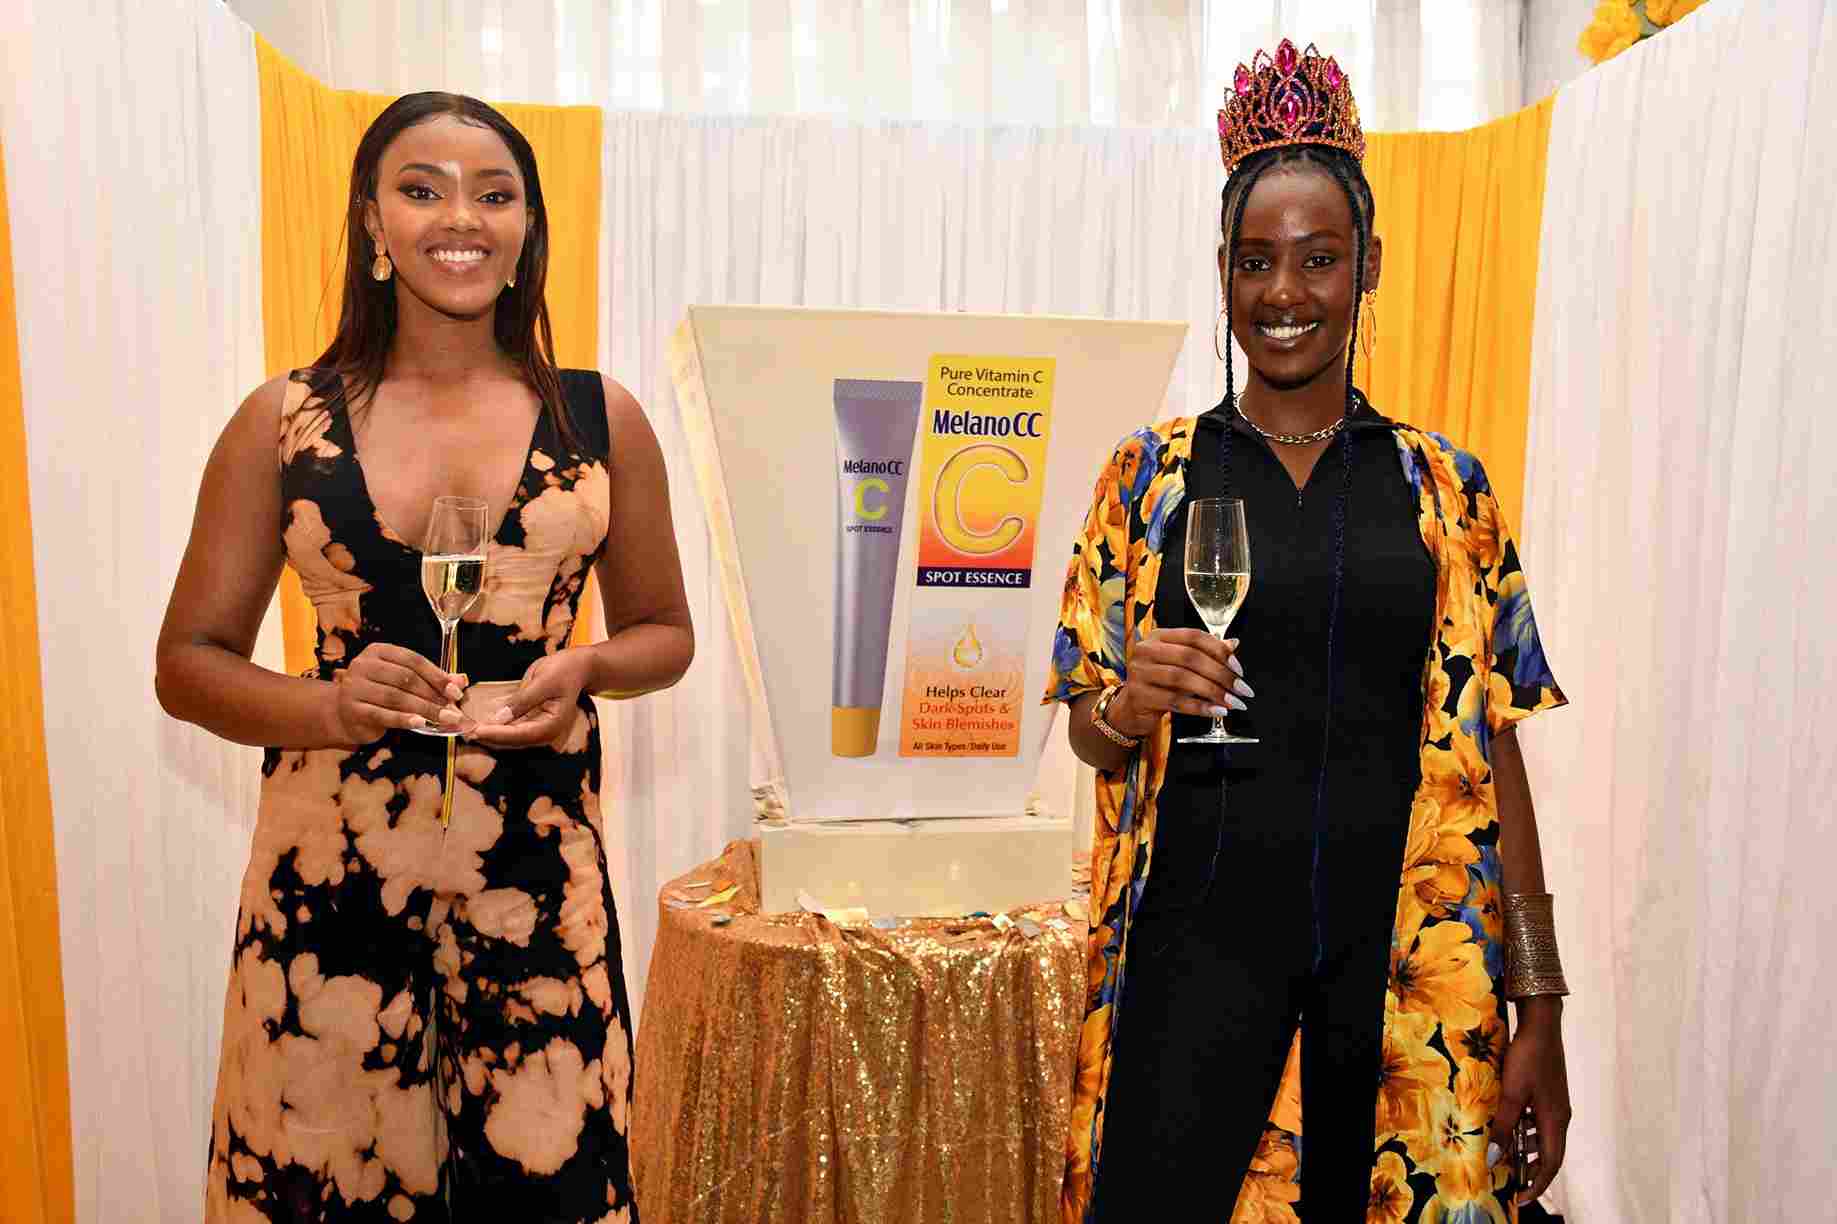 Miss Earth Kenya 2019 Susan Kirui (right) and Miss World Kenya 2019 Maria Wavinya pose for a picture during the launch of Melano CC beauty products at Skynest Slate Restaurant